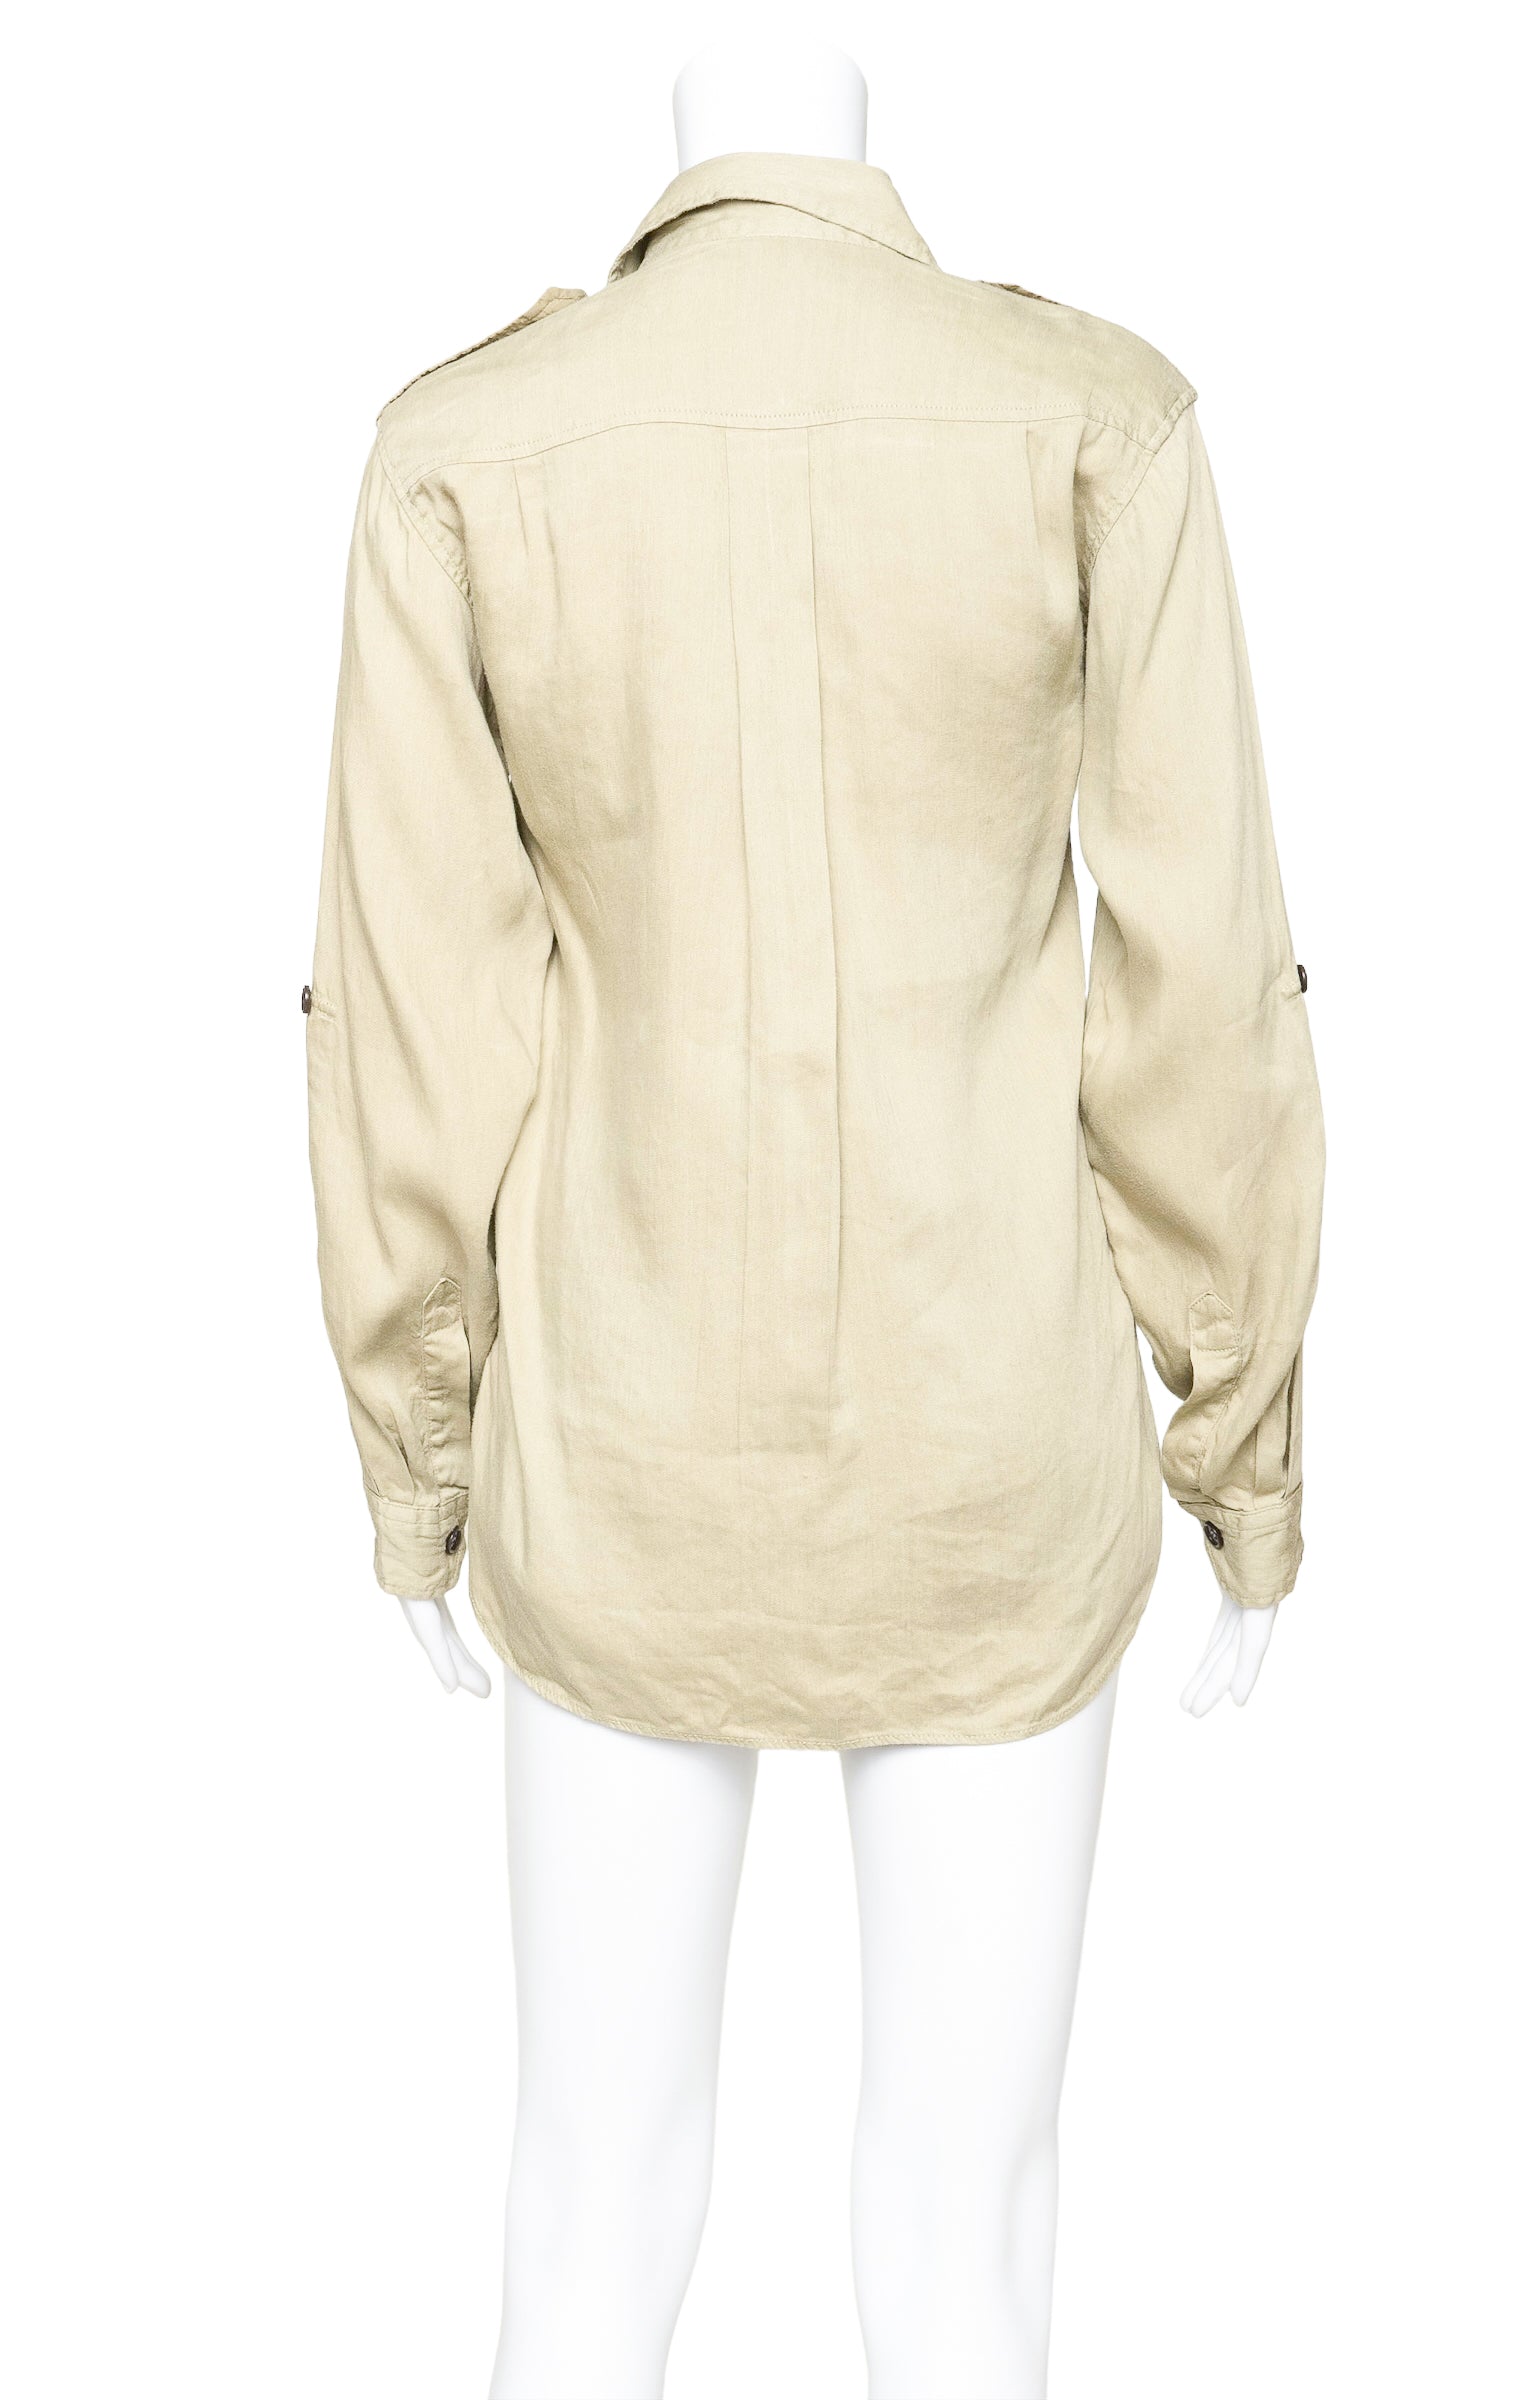 ISABEL MARANT ÉTOILE (RARE) Top Size: FR 36 / Comparable to US 2-4